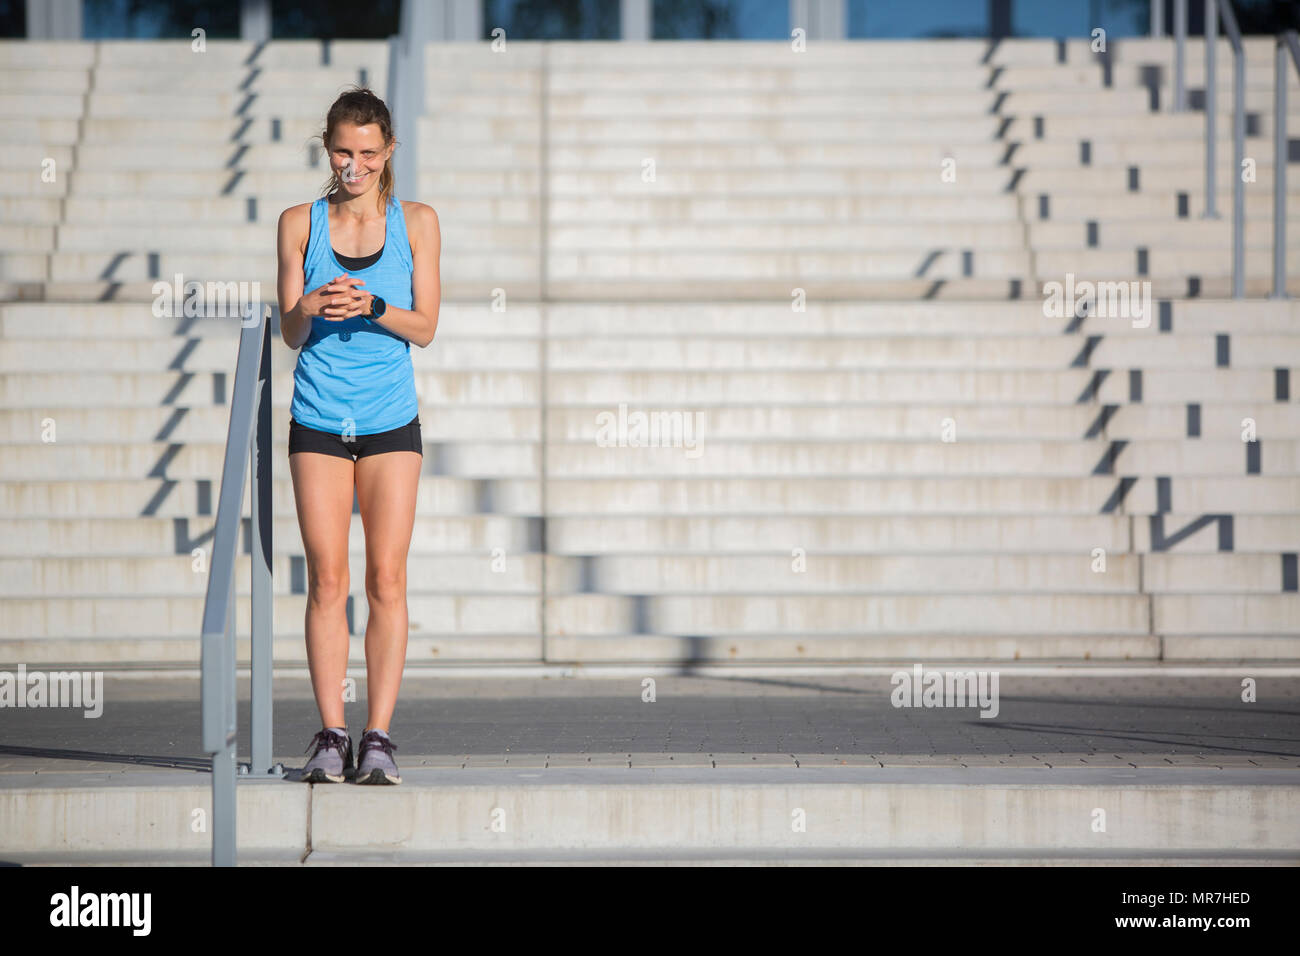 Cute Athlete woman warming up Stock Photo